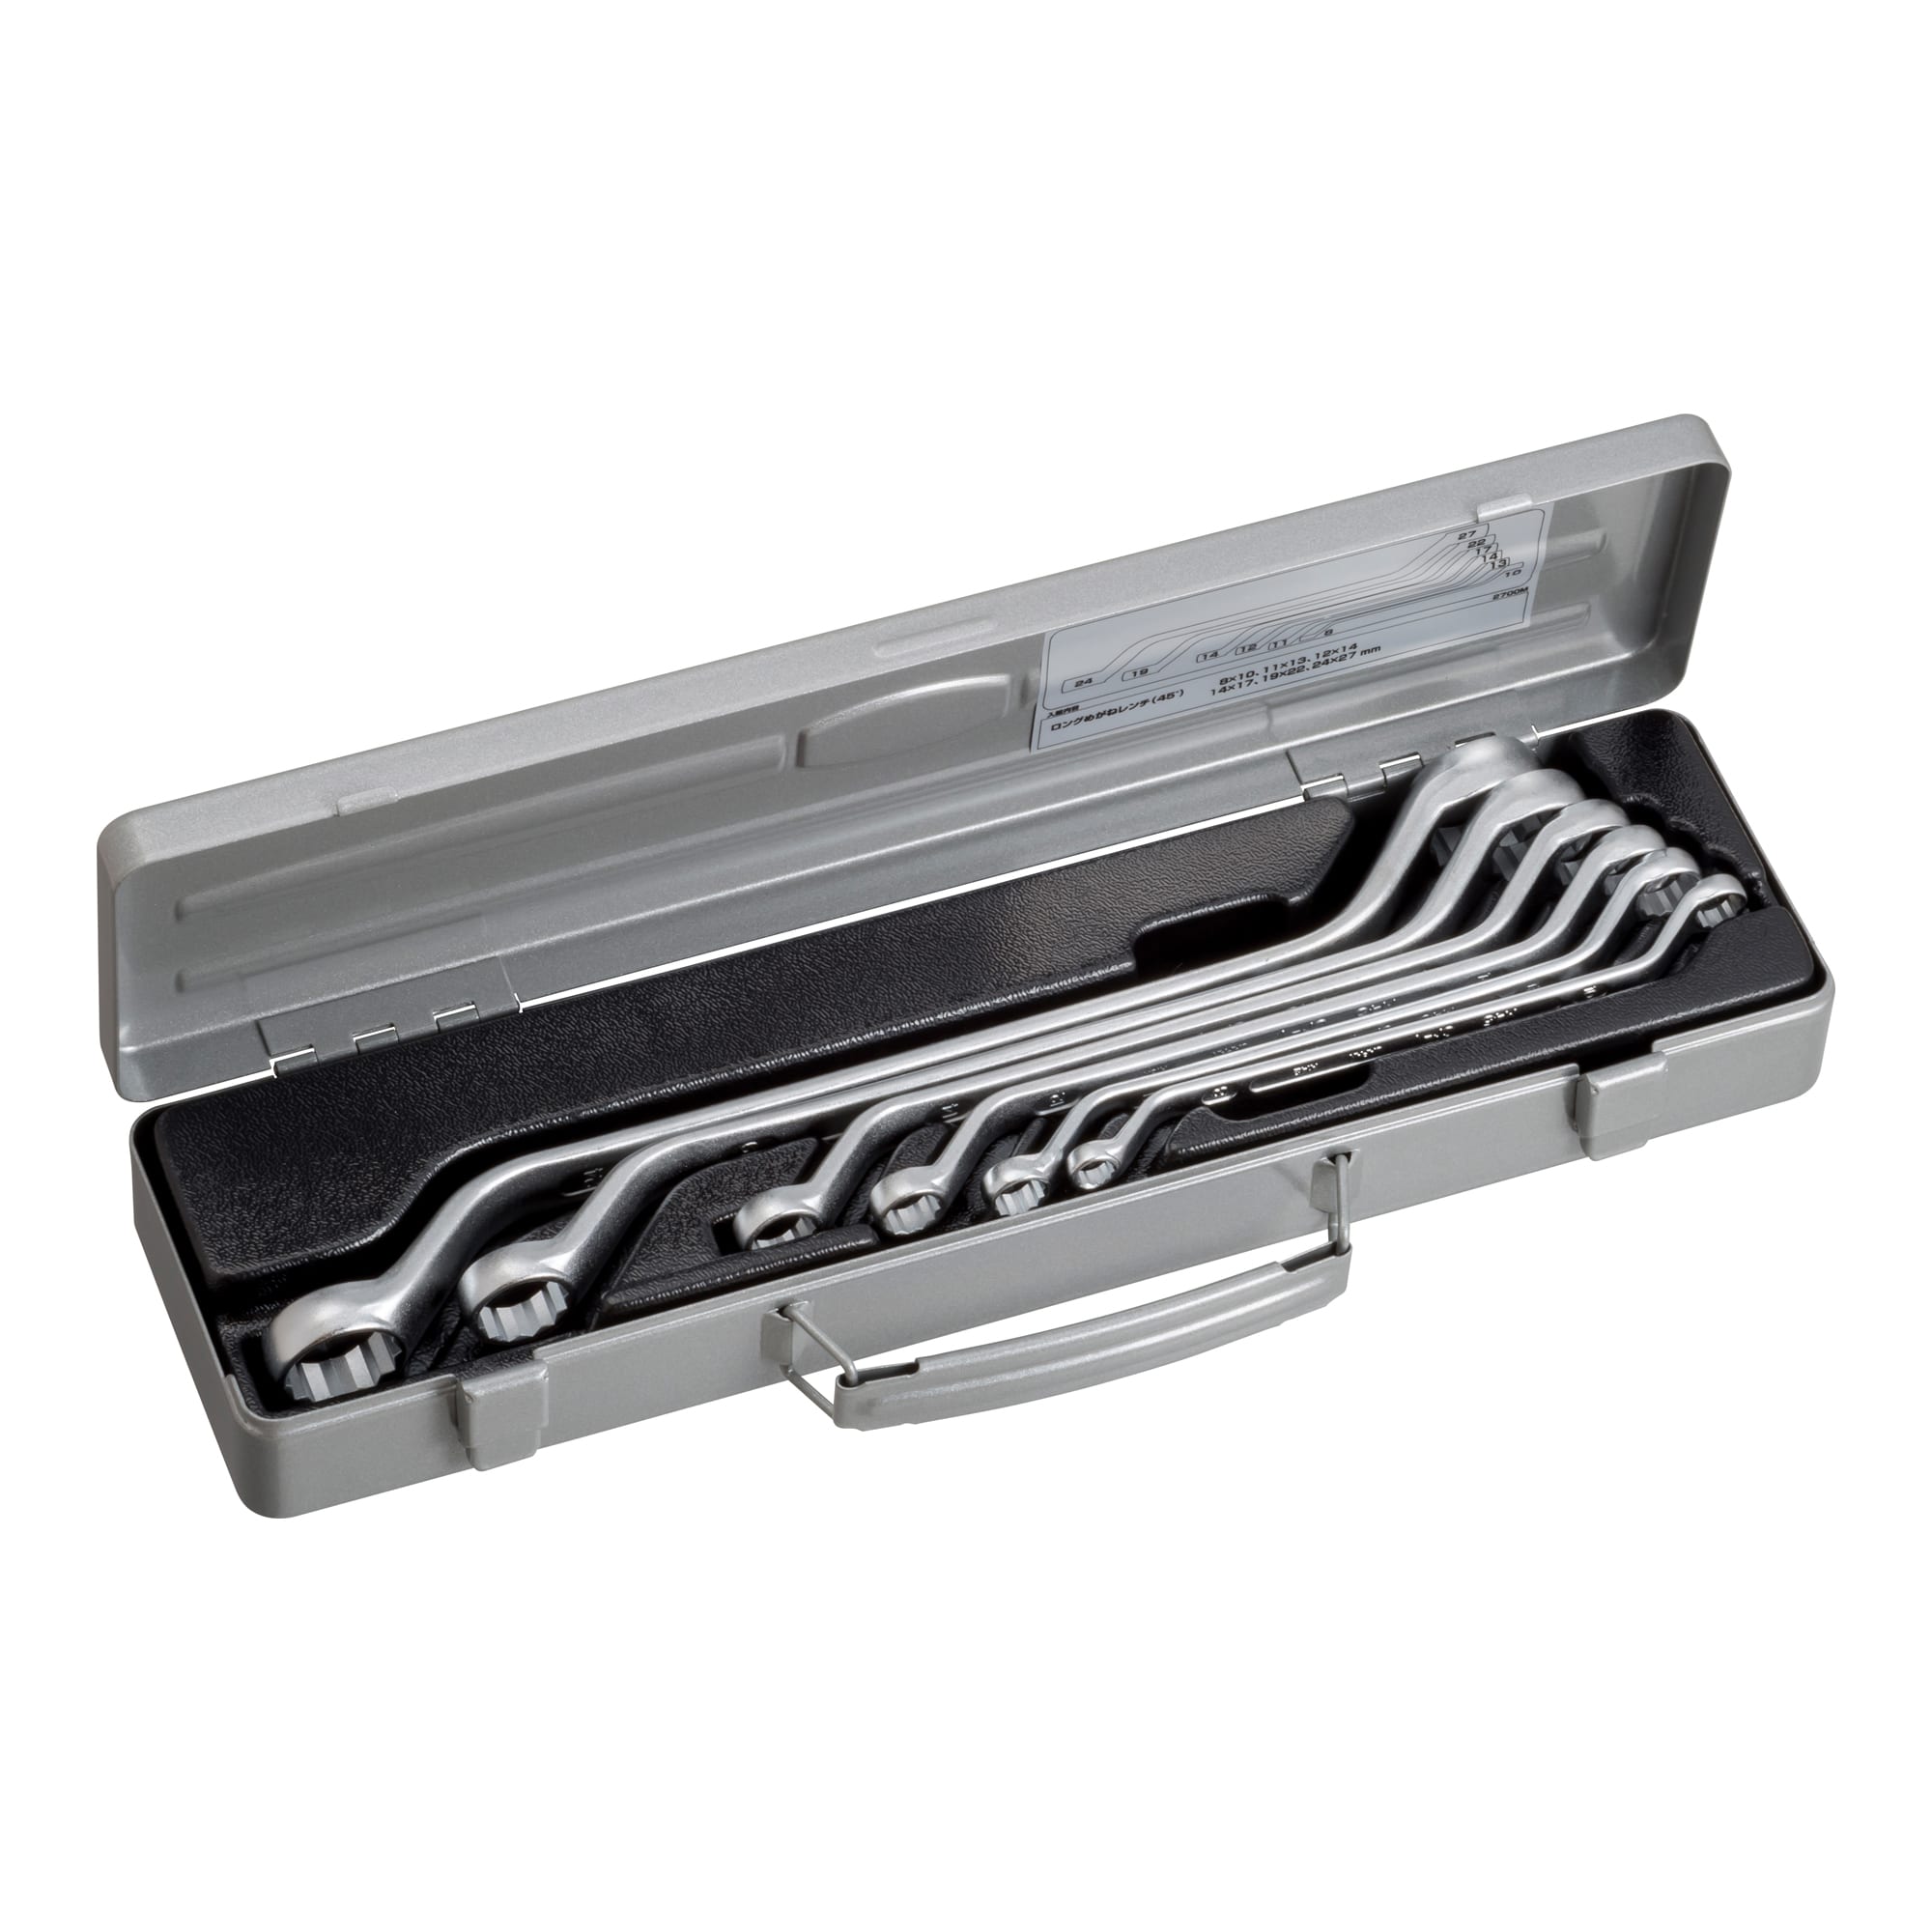 Long Offset Wrench Set (45°) 2700M